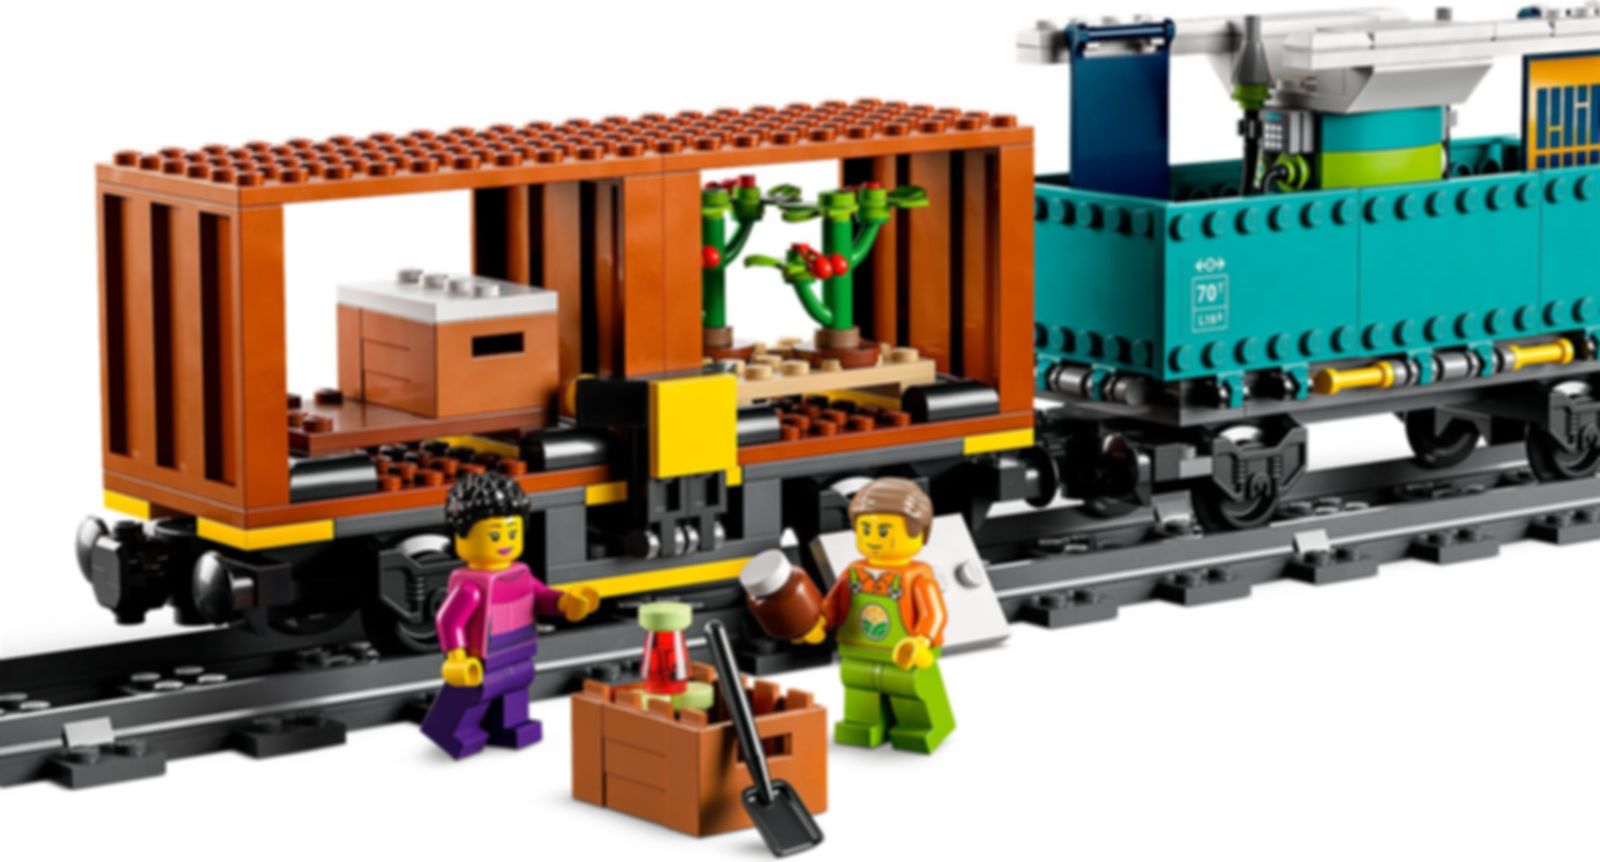 LEGO® City Freight Train components